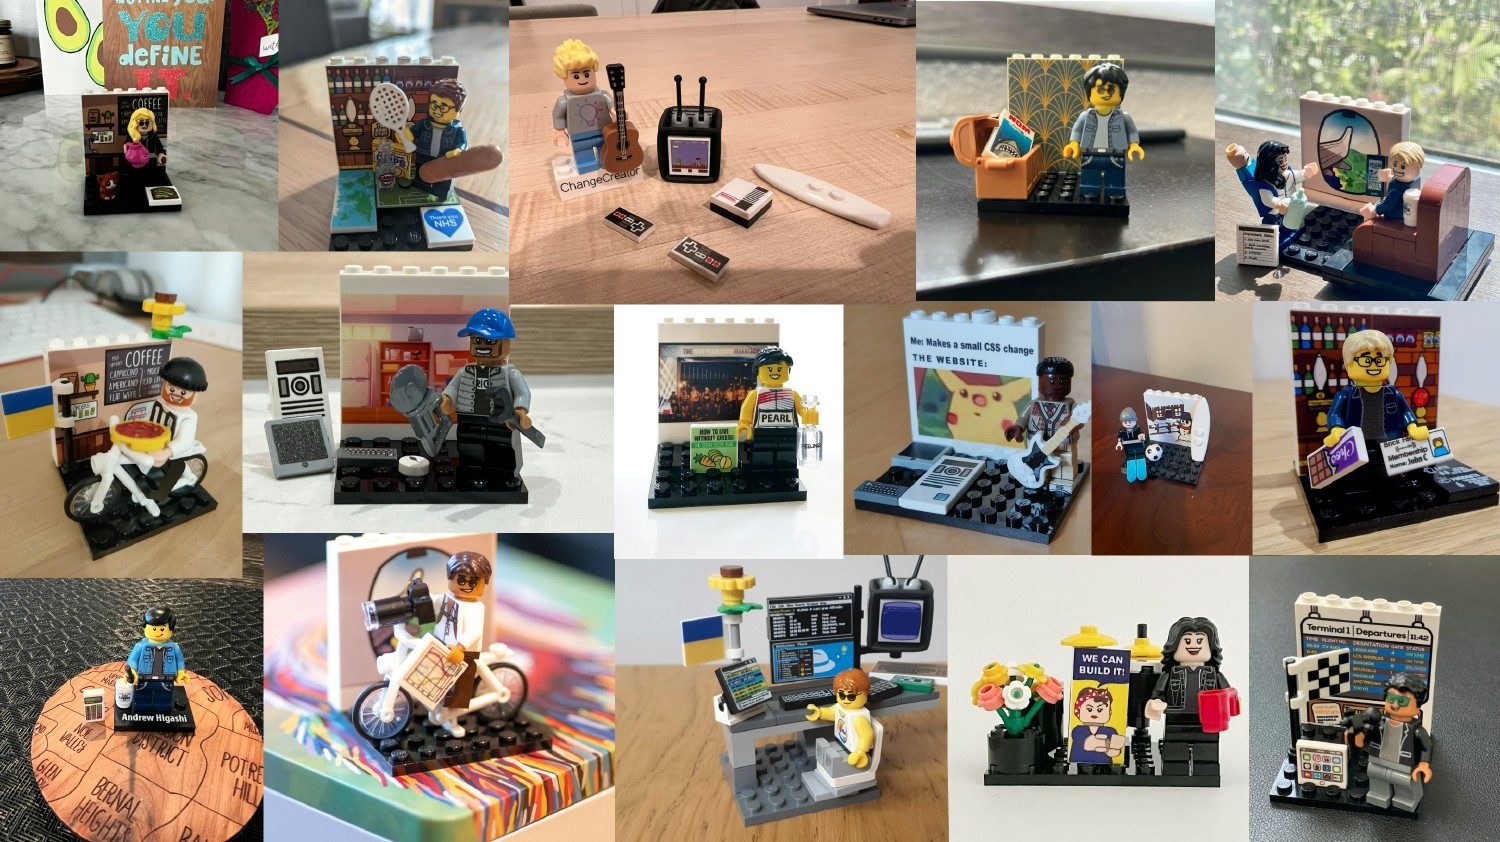 Each of our employees create their own Lego figurine with accessories explaining what they enjoy